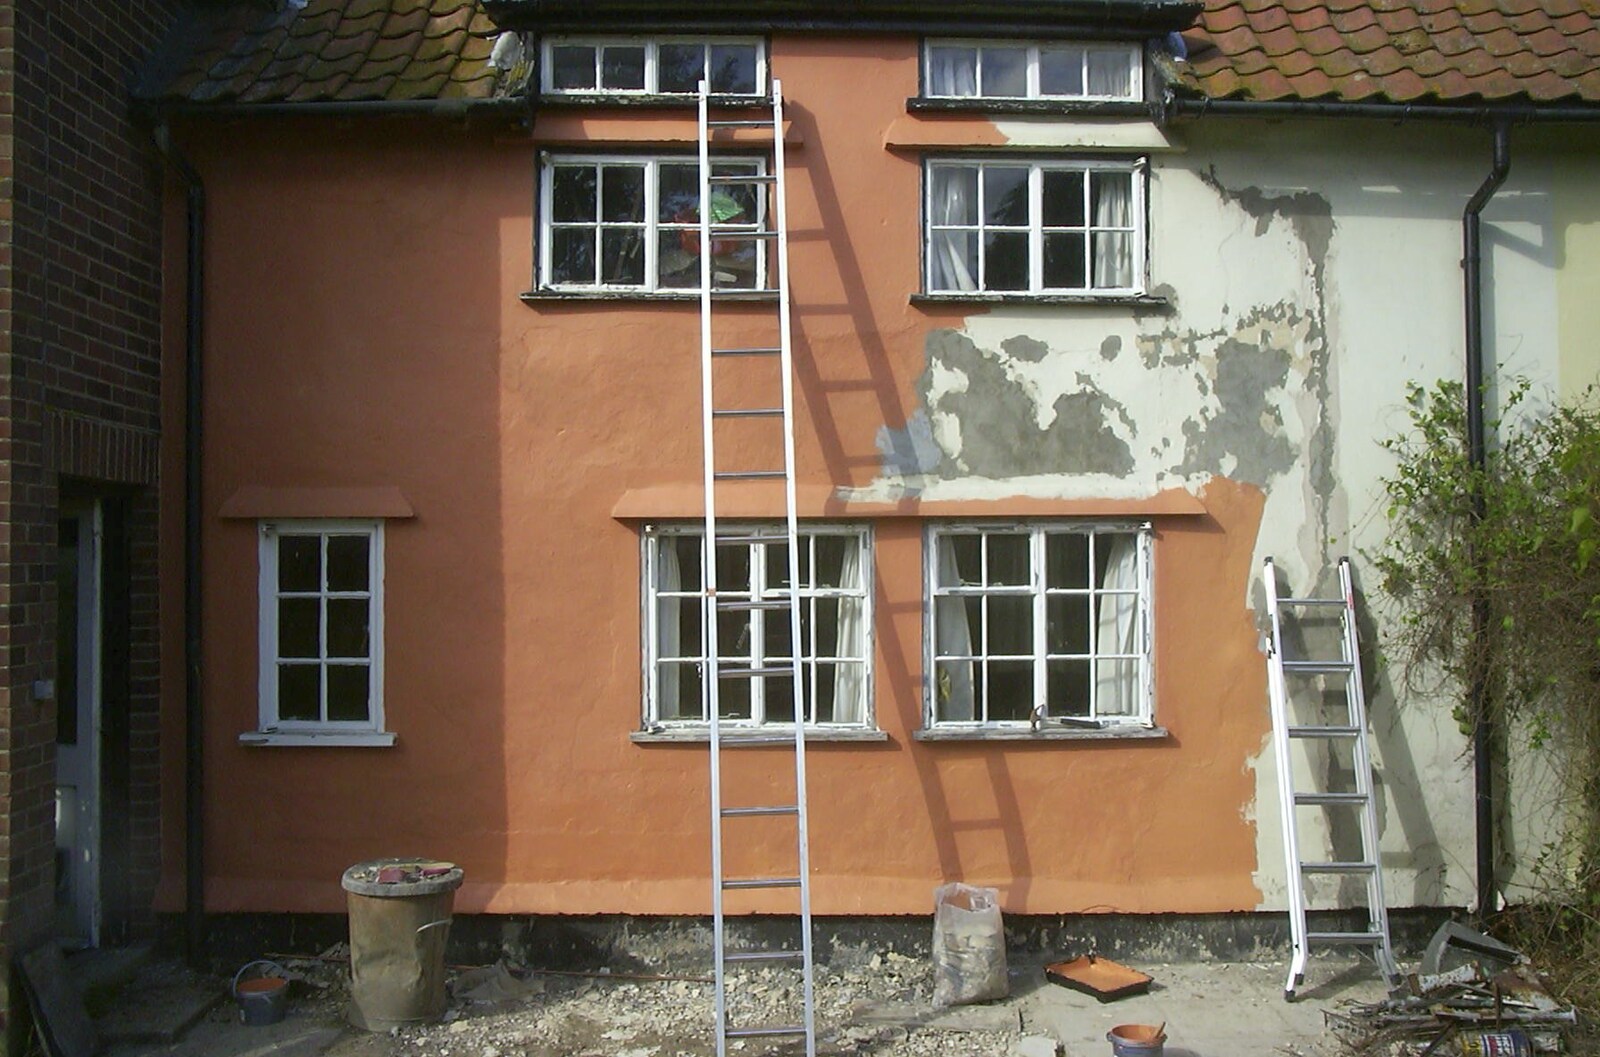 A Sponsored Swim, House Repairs and CISU at the Social Club, Brome, Diss and Ipswich - 5th October 2003: Paint goes on